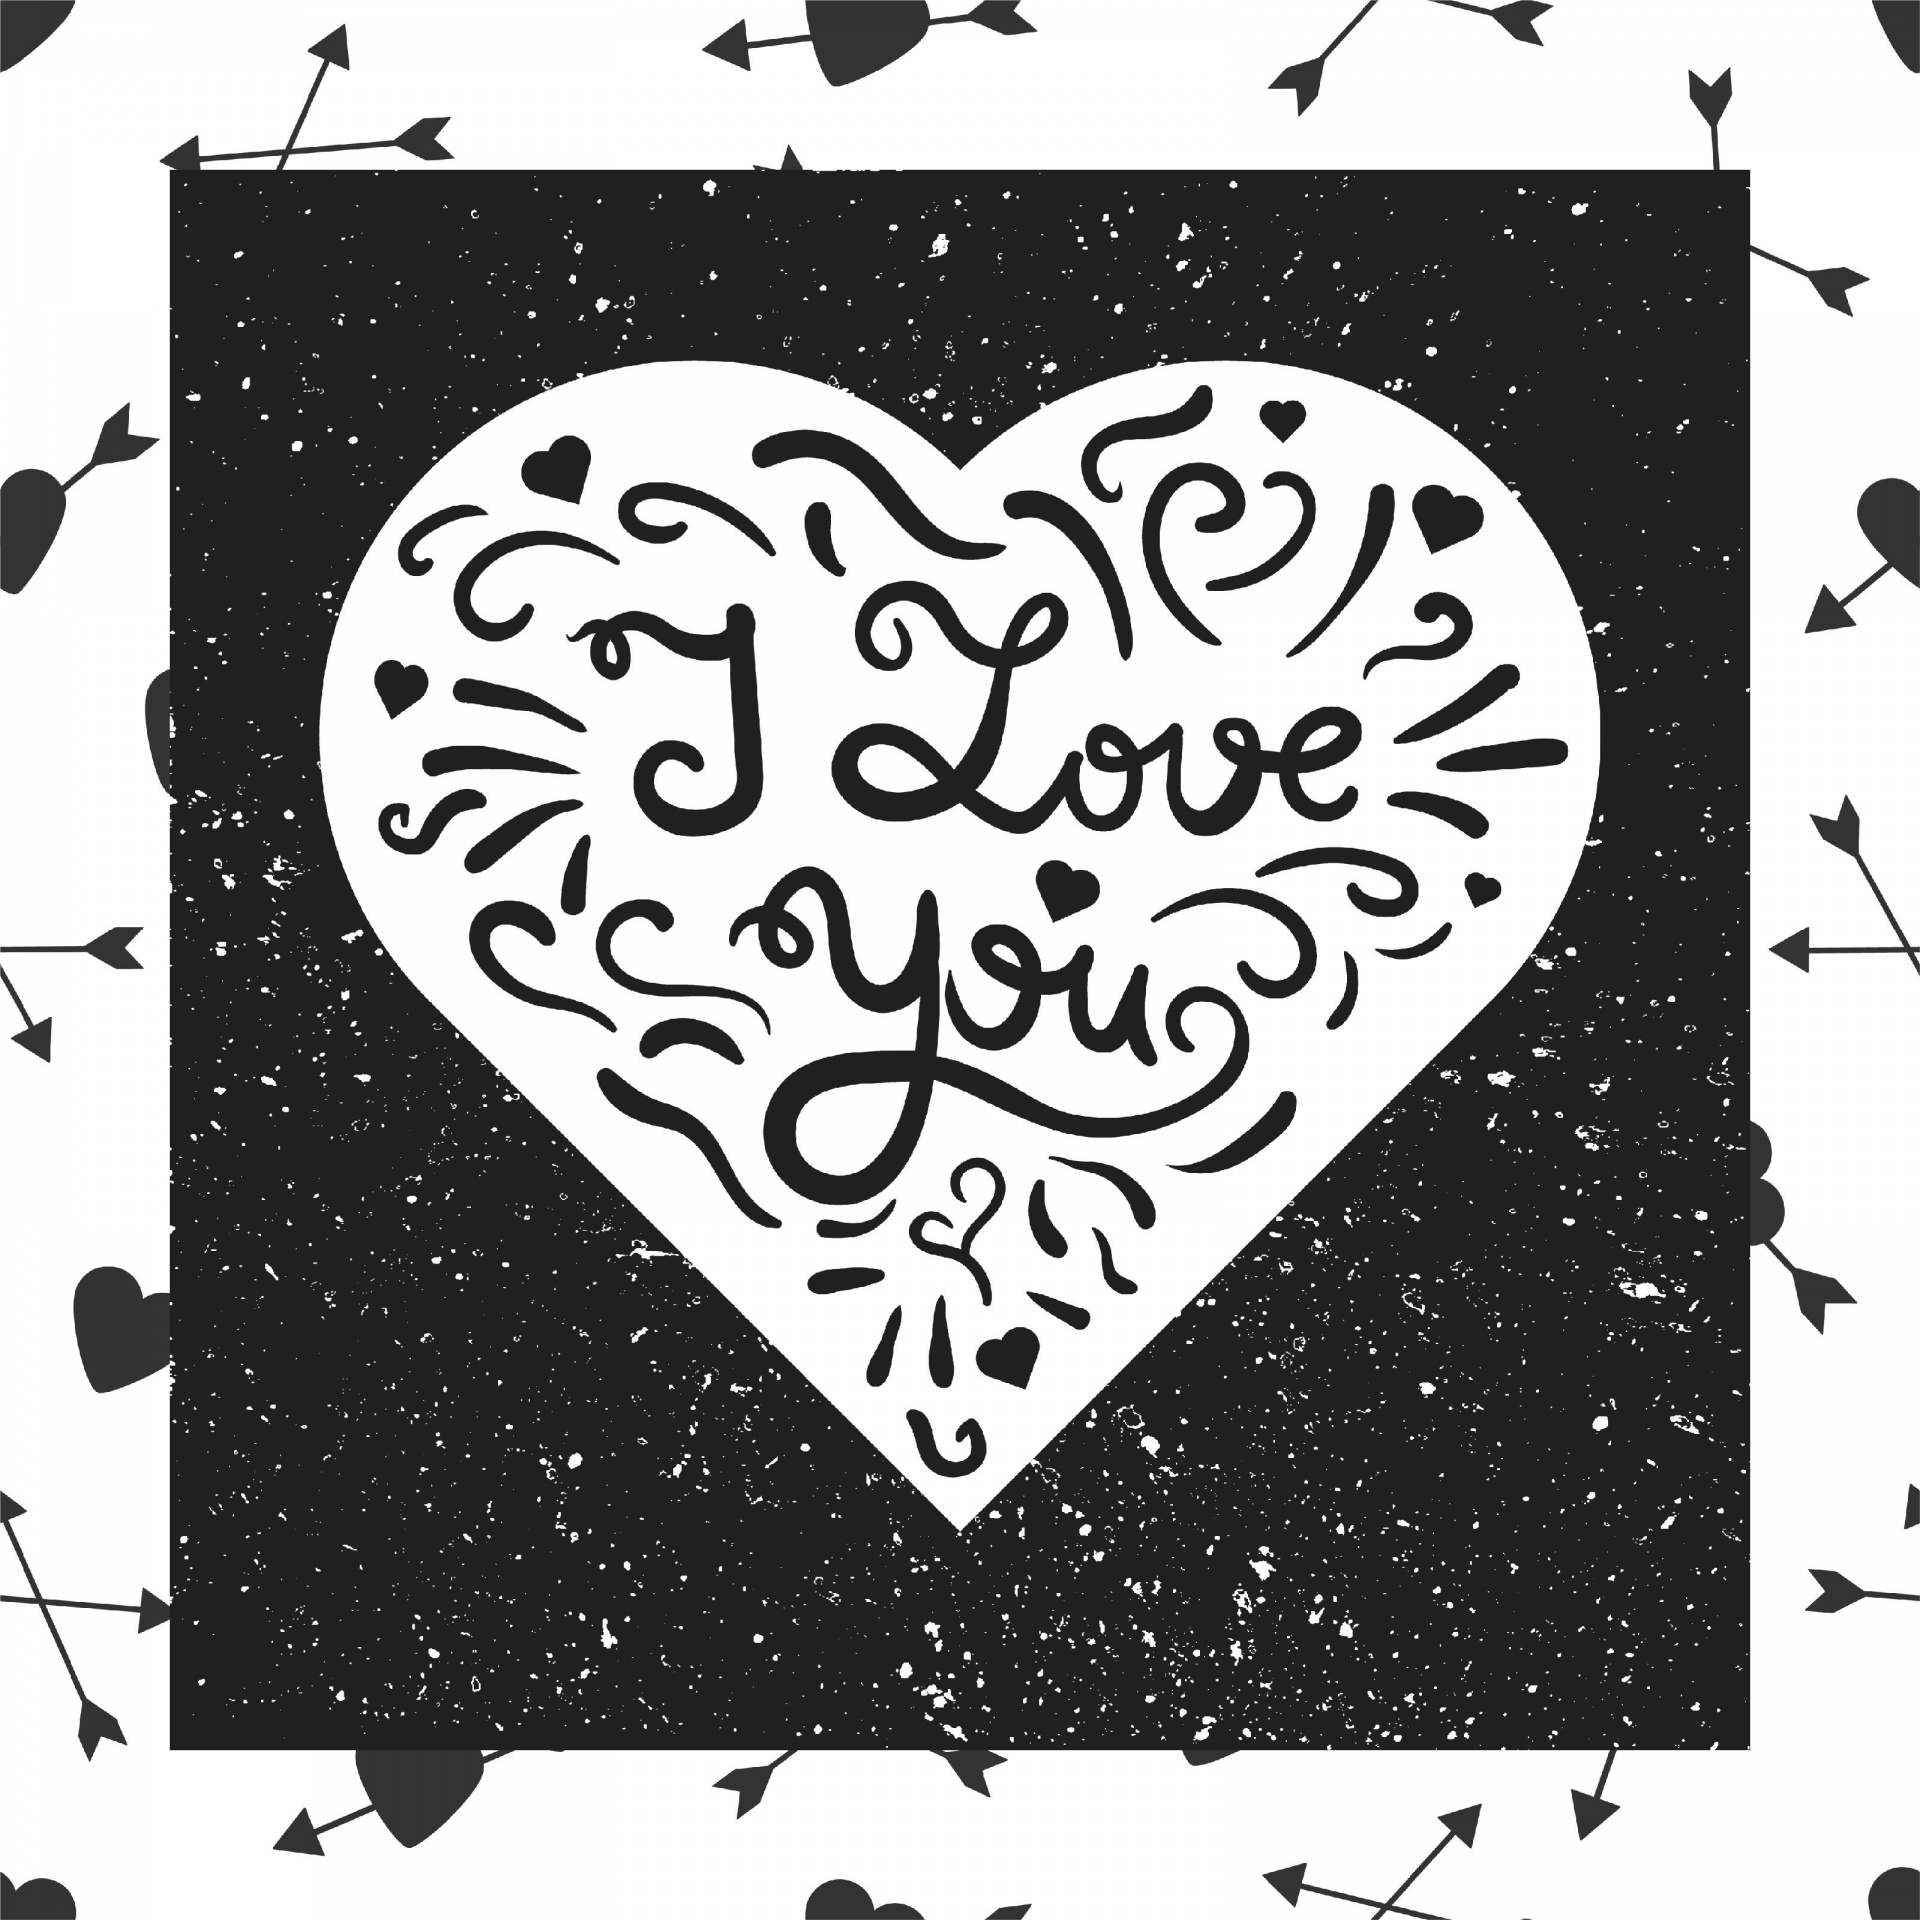 I LOVE you doodle filled heart on grunge background with hearts and arrows border